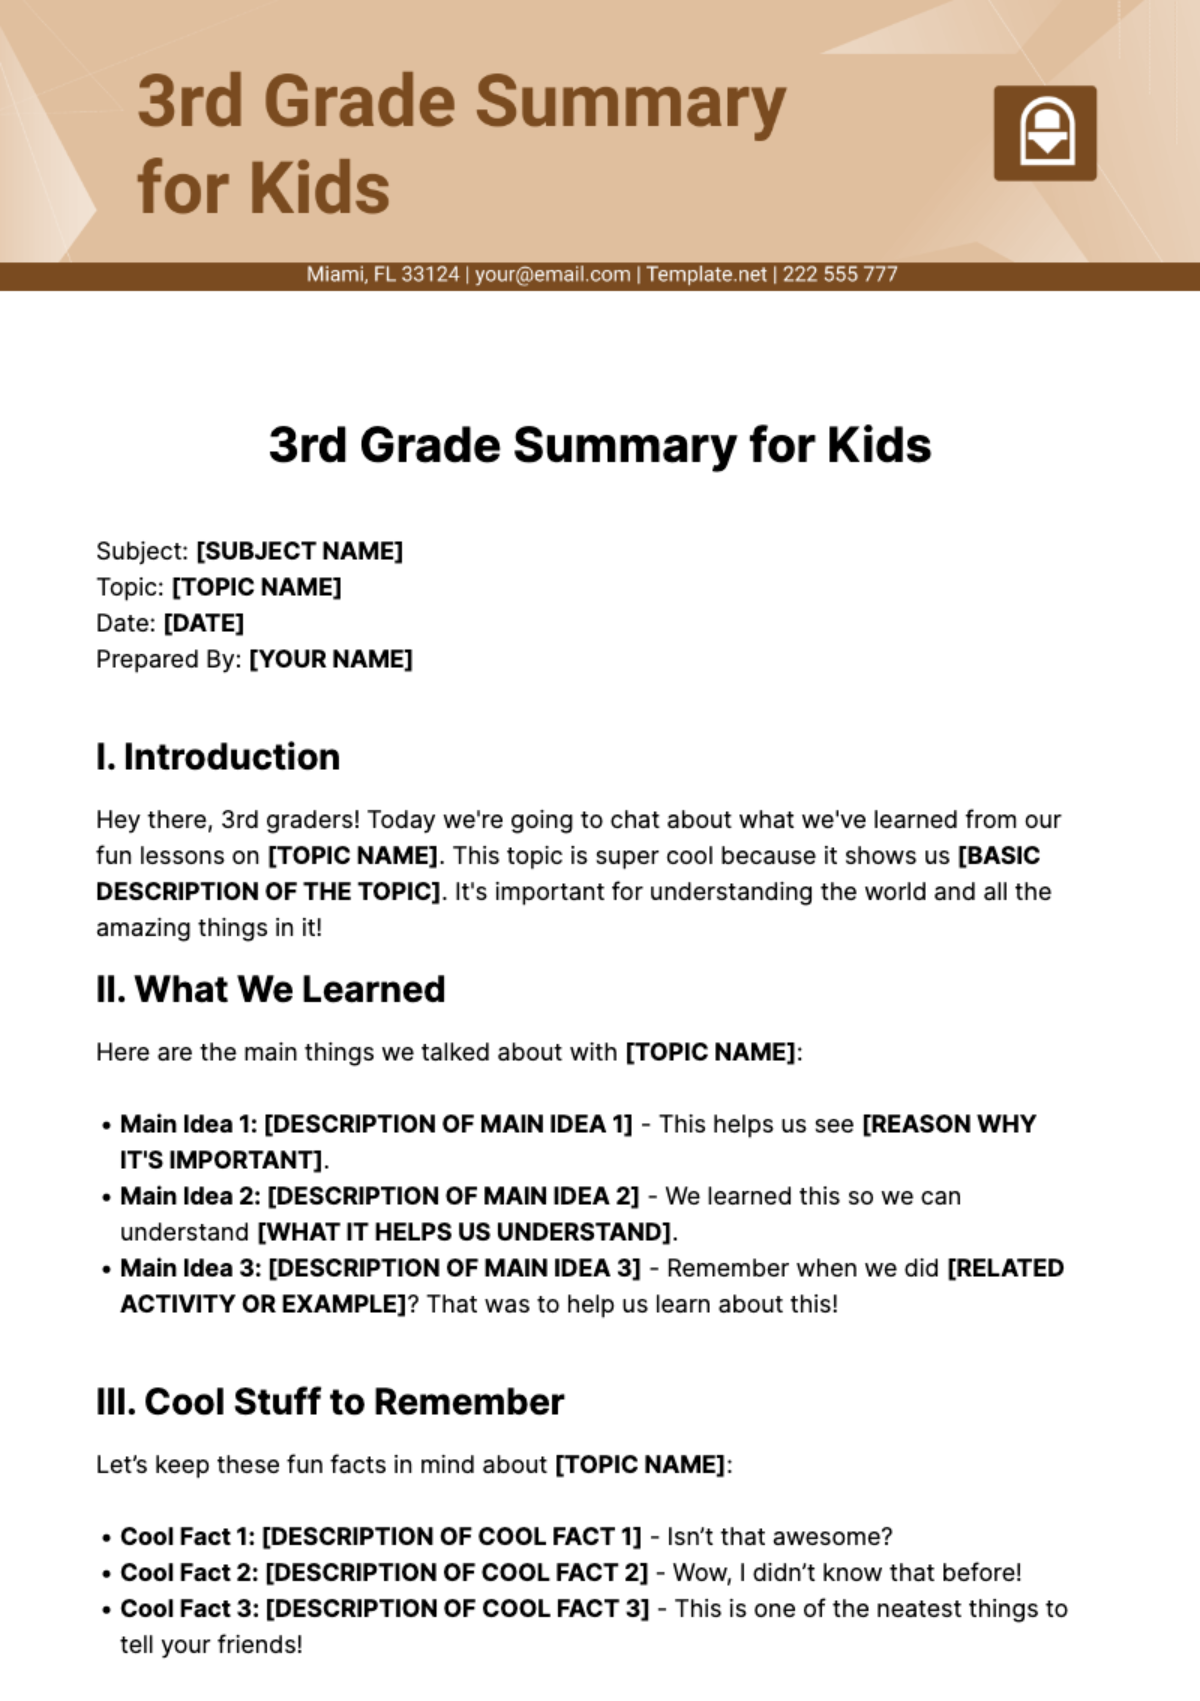 3rd Grade Summary for Kids Template